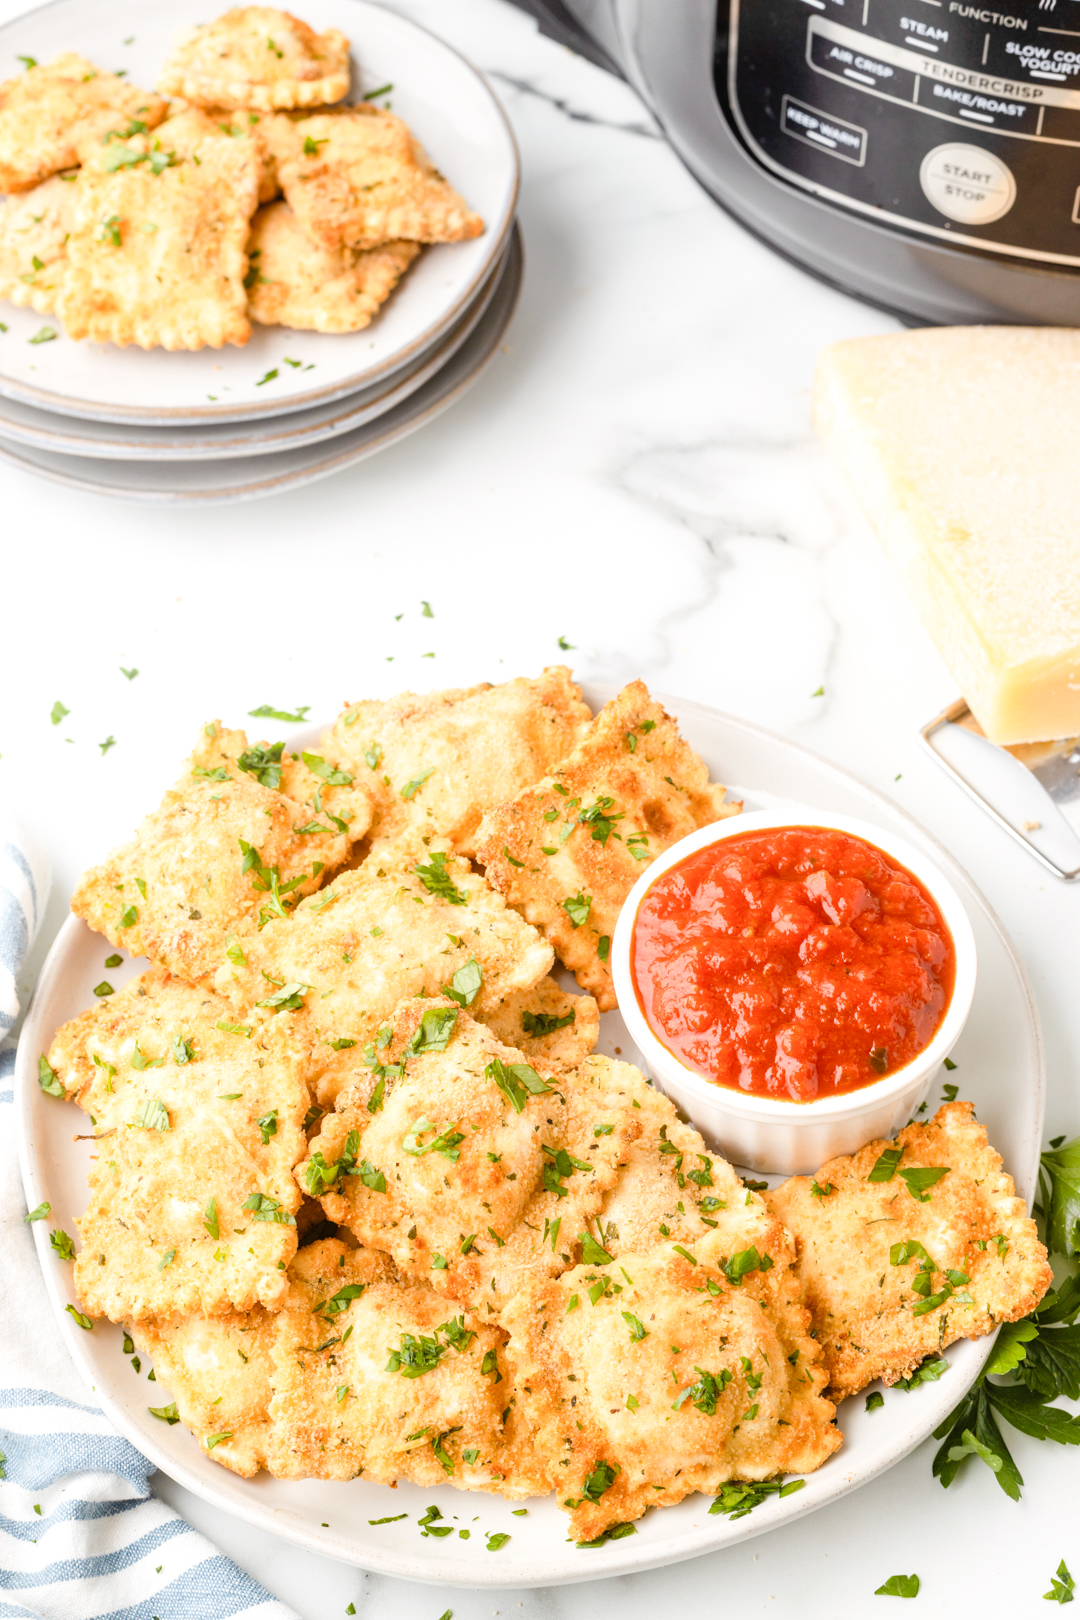 breaded ravioli appetizer on a plate with a small dish of marinara sauce for dipping